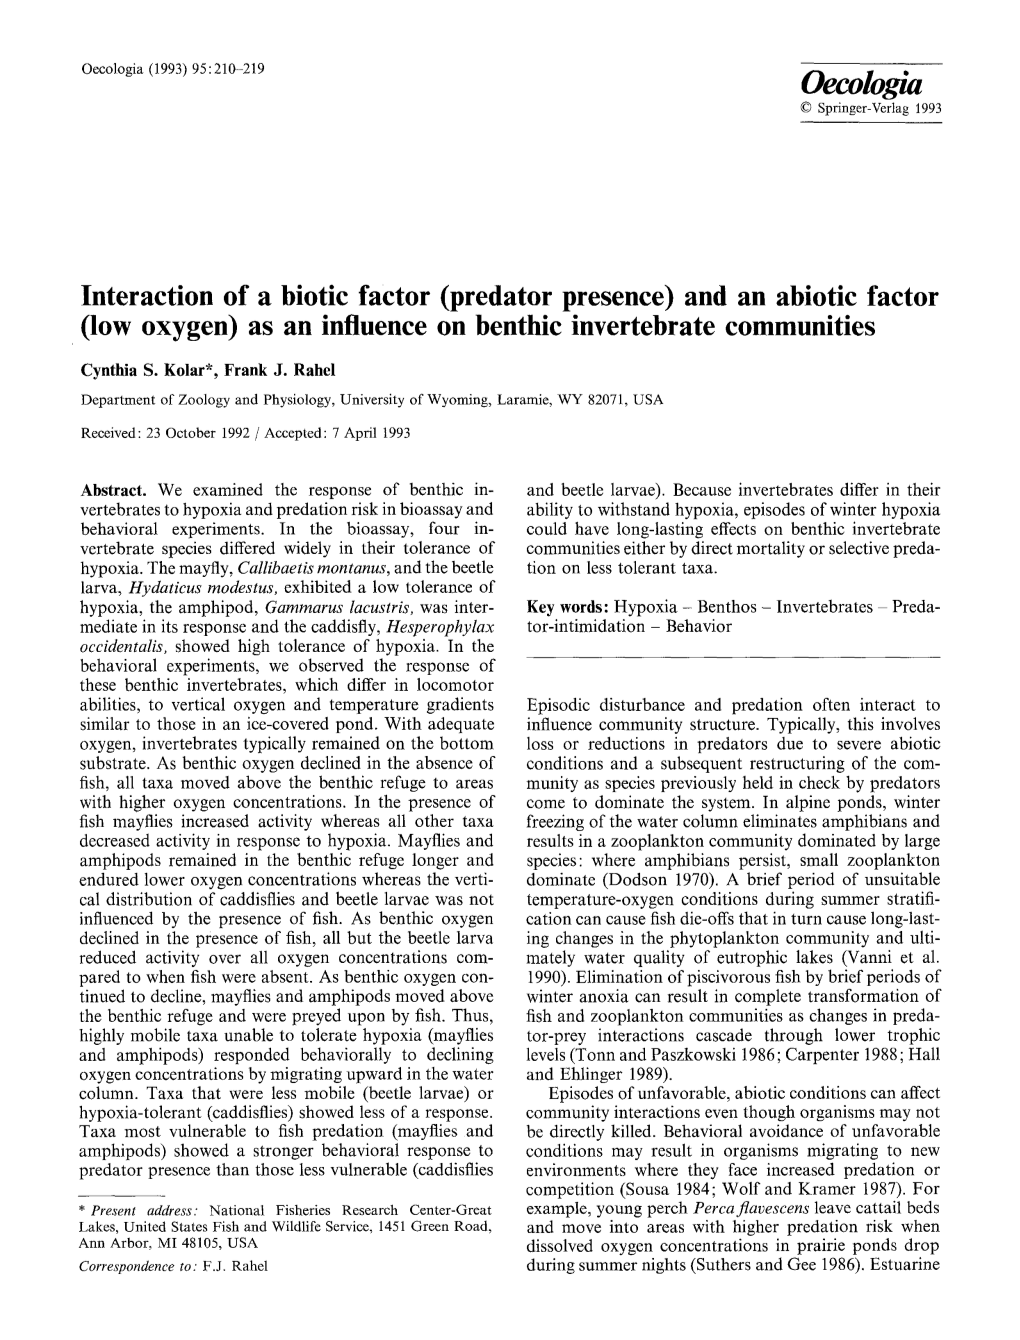 And an Abiotic Factor (Low Oxygen) As an Influence on Benthic Invertebrate Communities